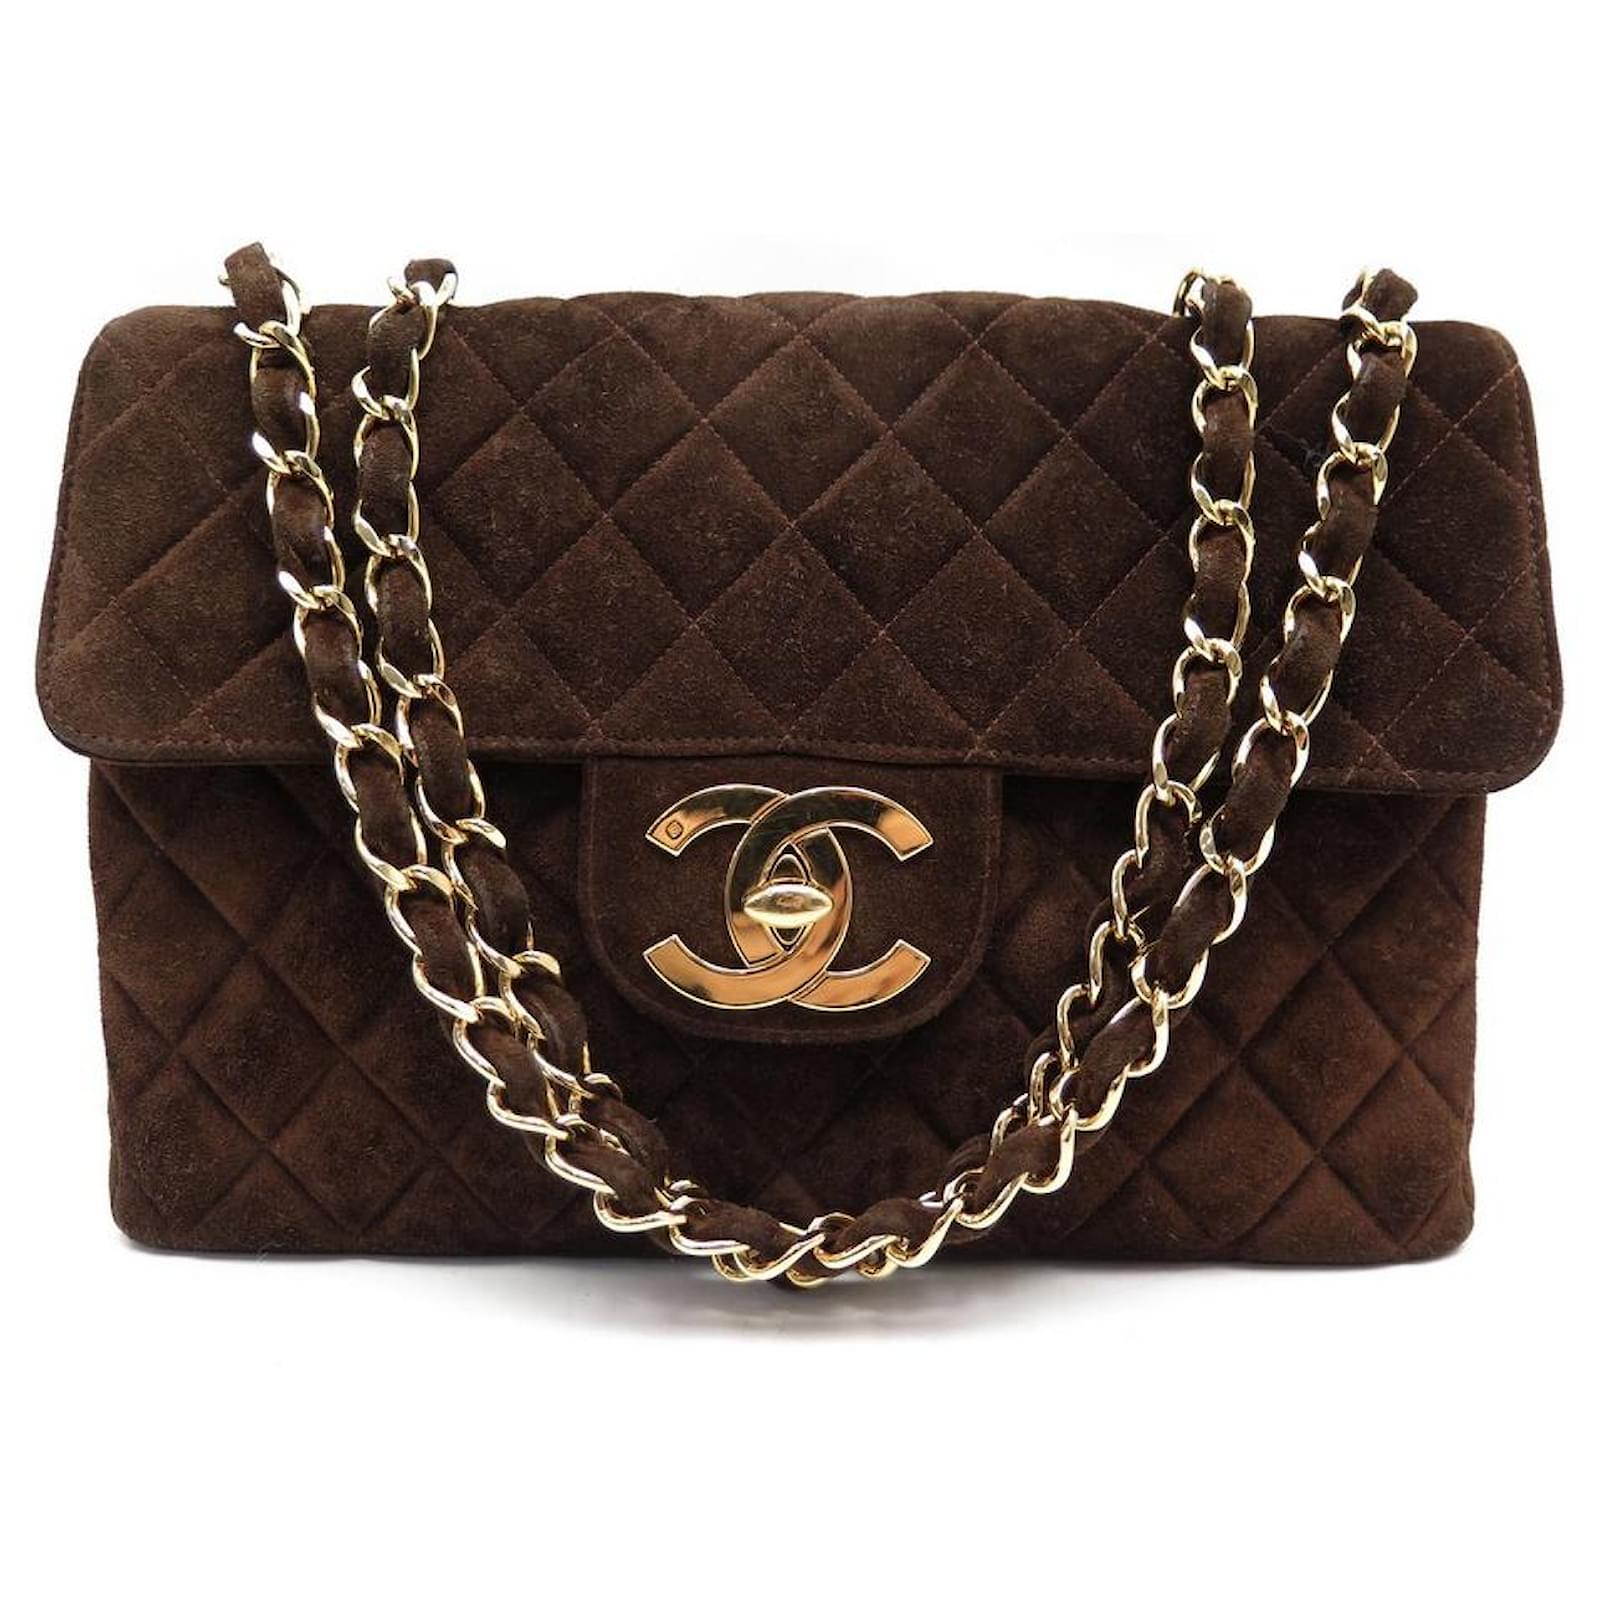 VINTAGE CHANEL TIMELESS MAXI JUMBO SUEDE QUILTED HAND BAG Brown ref.501035  - Joli Closet